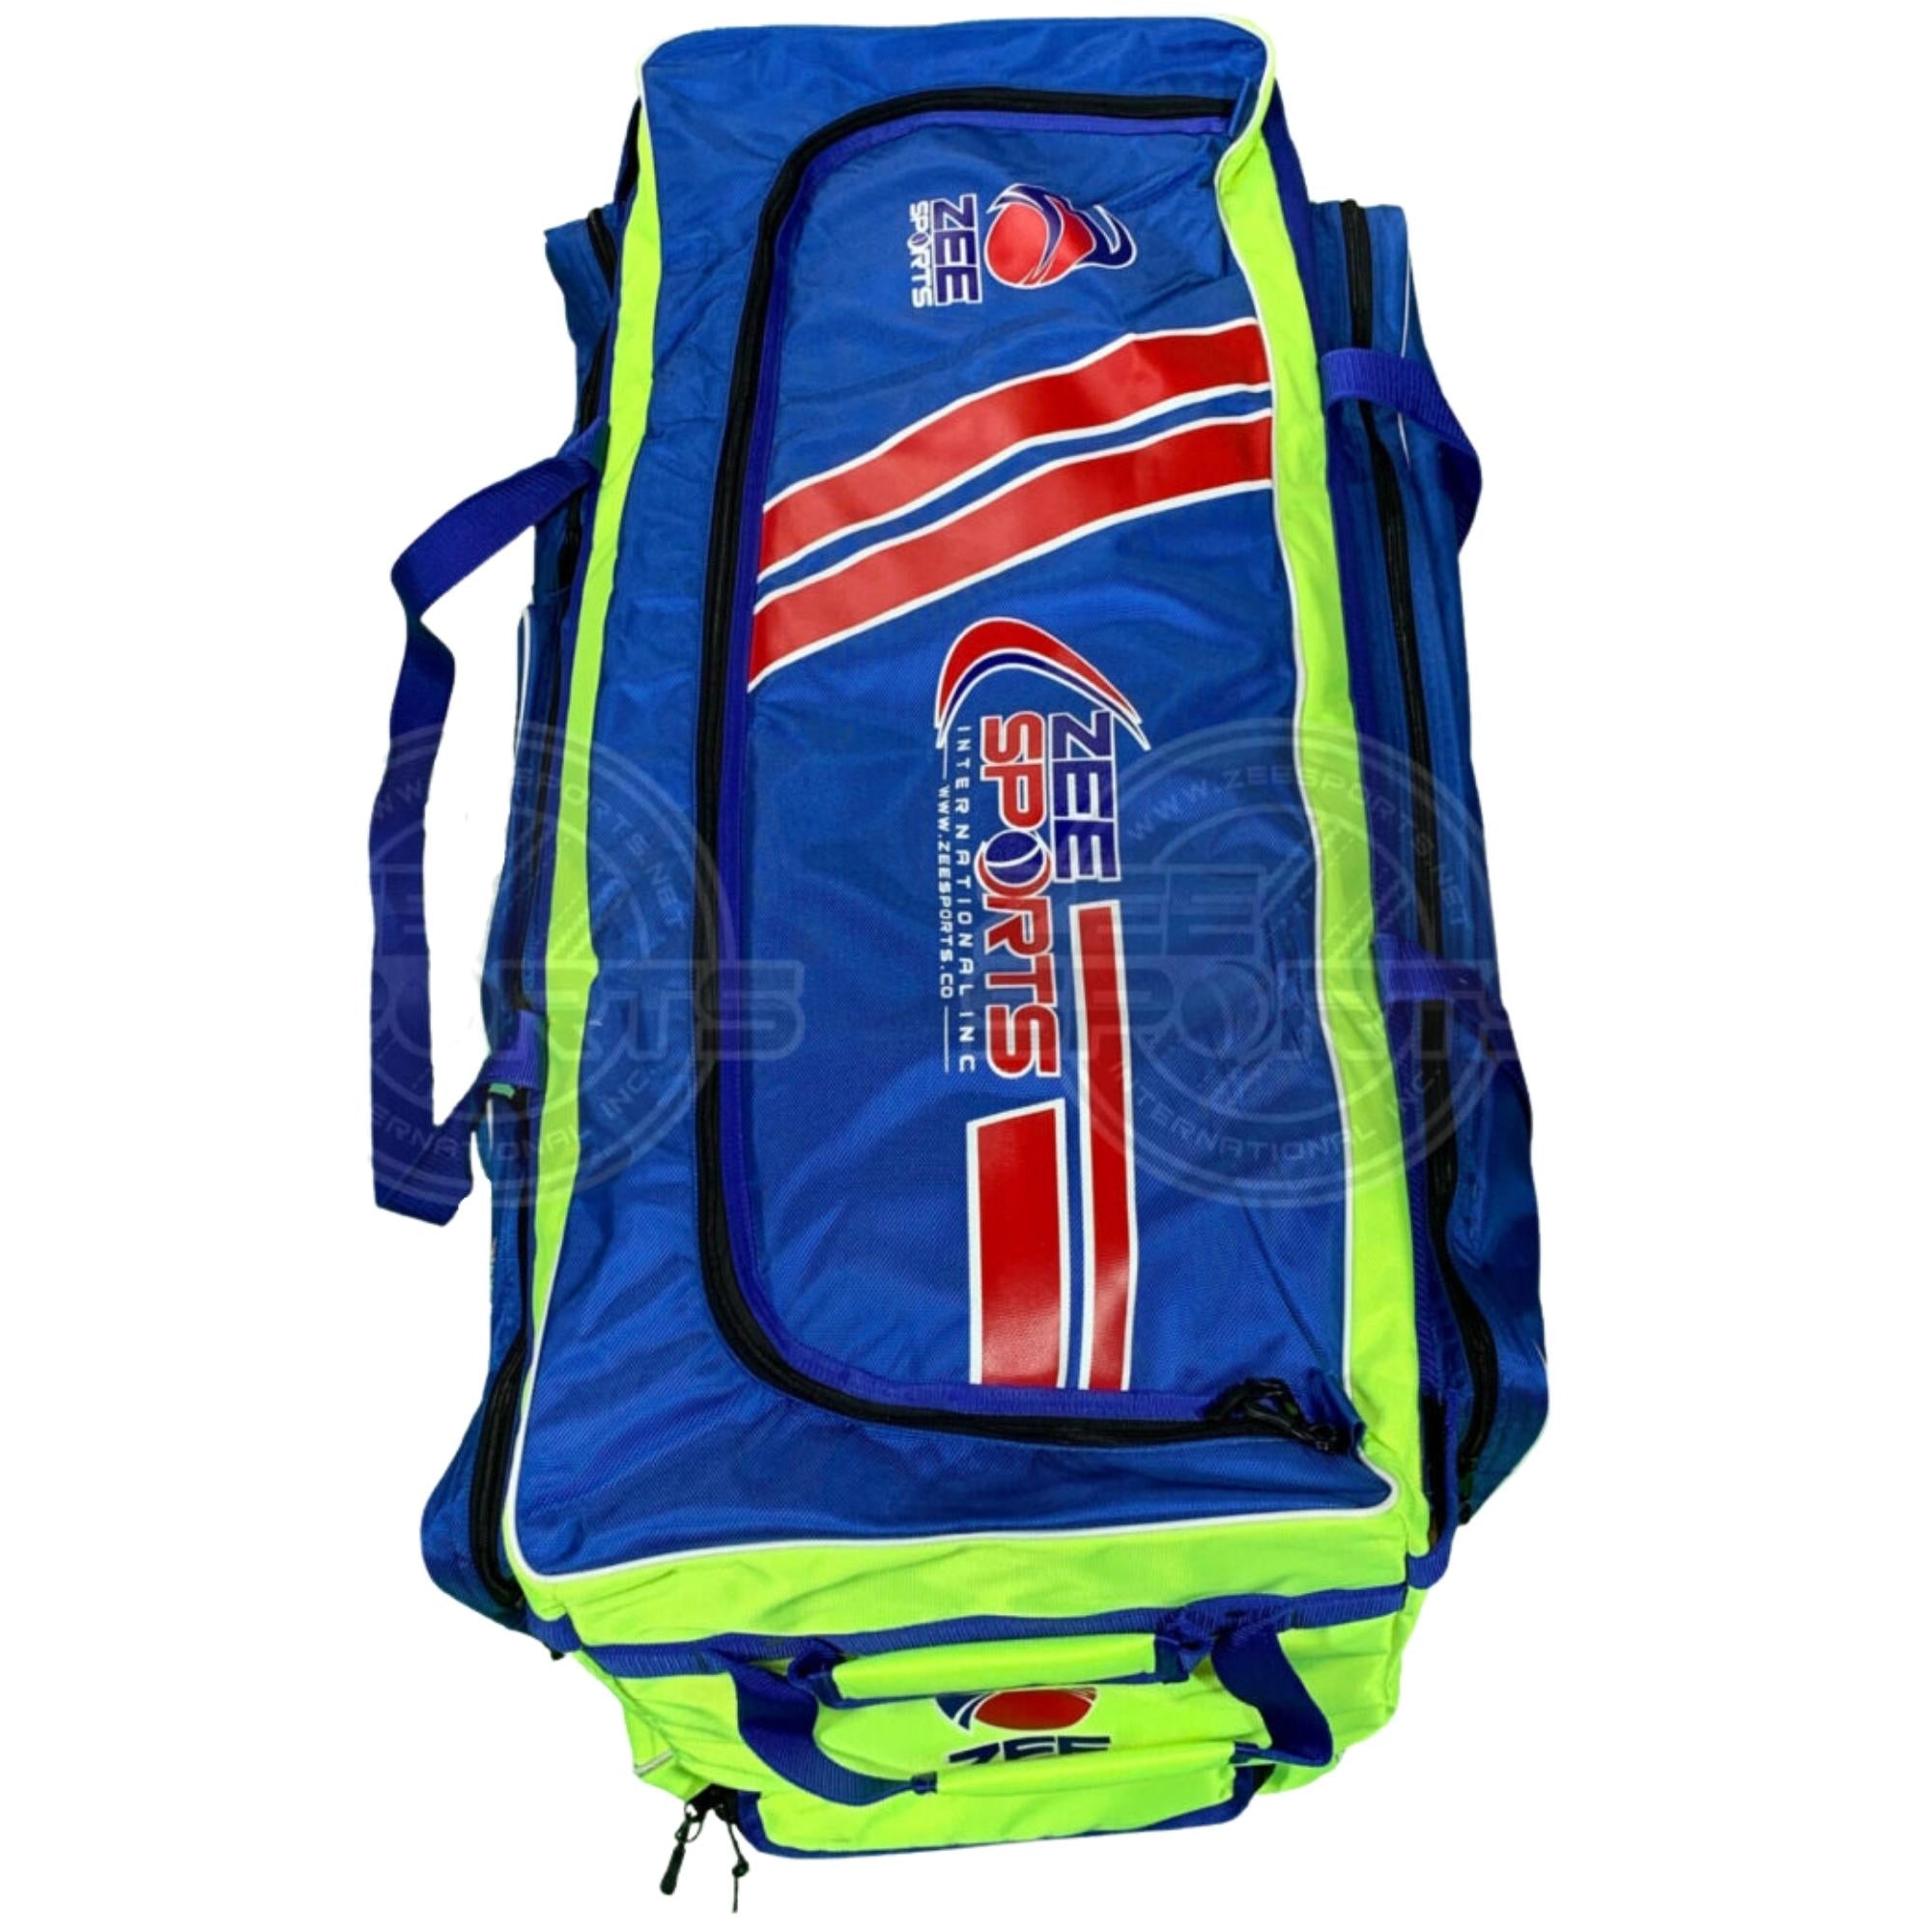 Zee Sports Cricket Kit Bag Lime Green with Blue Color Combination Dual Compartment